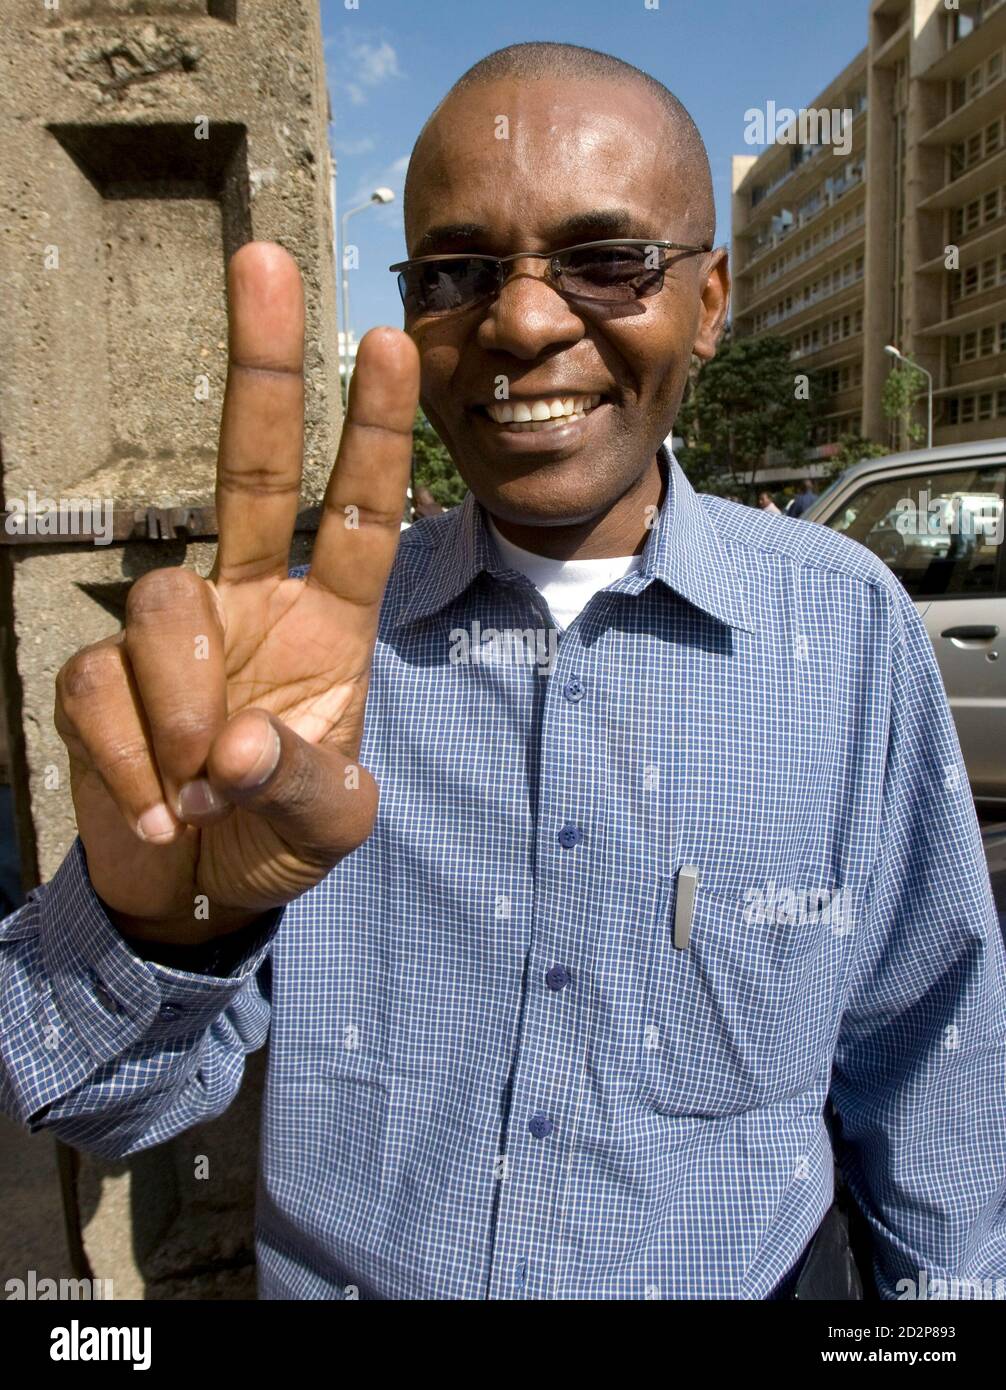 Andrew Mwangura, director of the Mombasa-based East African Seafarers' Assistance Program, gestures to the camera after an interview with Reuters in Kenya's capital Nairobi June 3, 2009. A former seaman, Mwangura breaks news time and time again on seizures and releases of ships by Somali pirates, revealing details of ransom payments in what has become a multimillion dollar business. Picture taken June 3, 2009. To match interview SOMALIA-PIRACY/MWANGURA REUTERS/Thomas Mukoya (KENYA ENTERTAINMENT CRIME LAW) Stock Photo